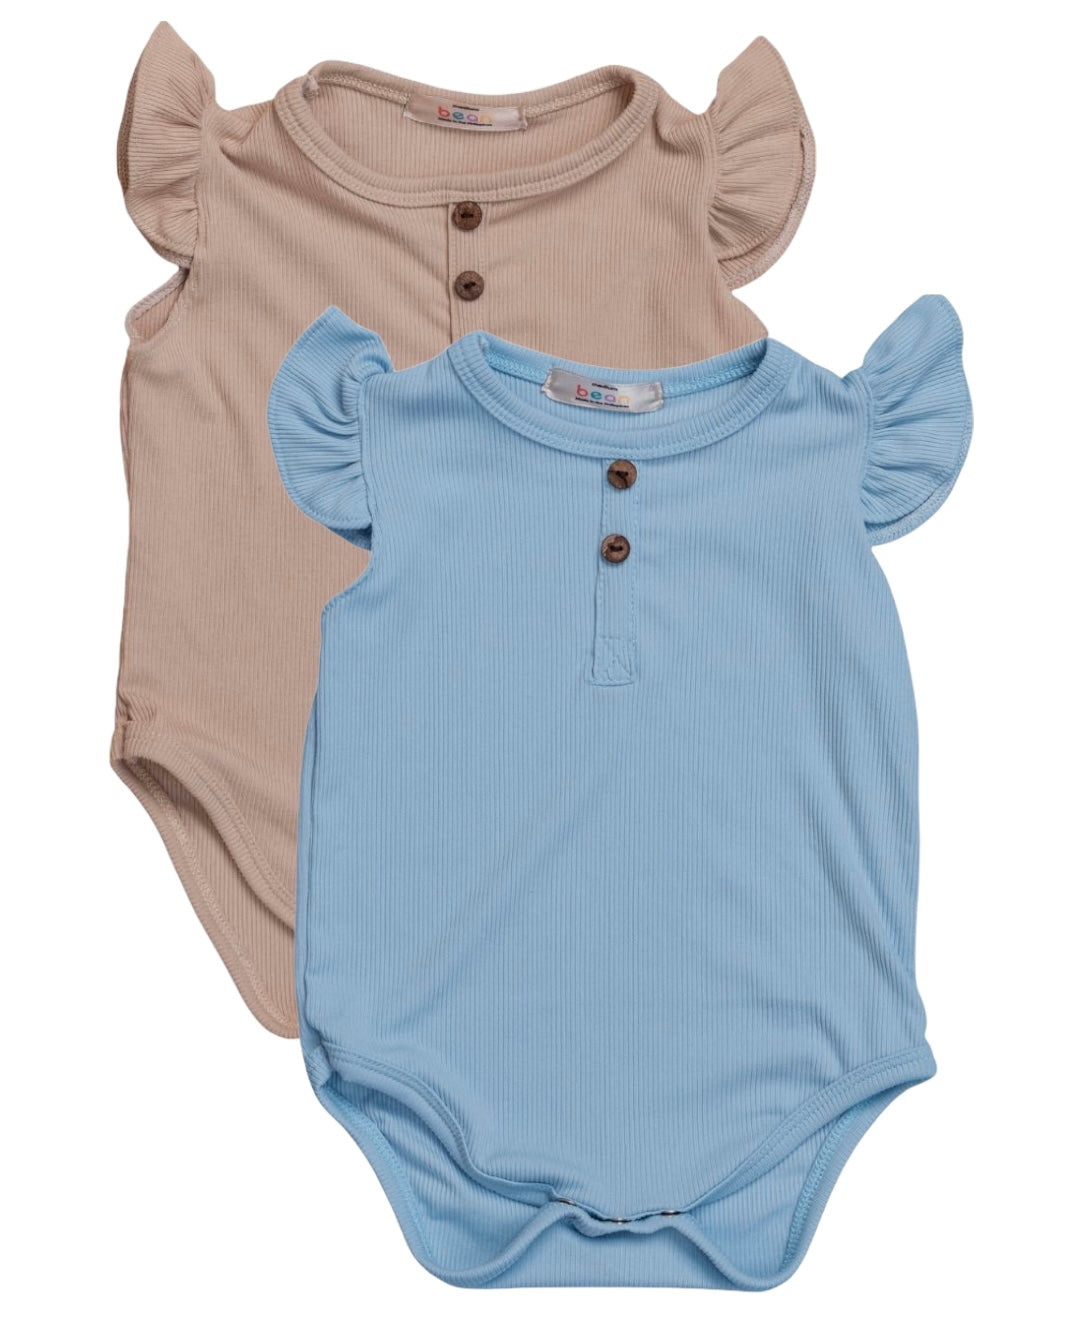 Comfy Casuals Play Ruffle Sleeve Onesies - Set of 2